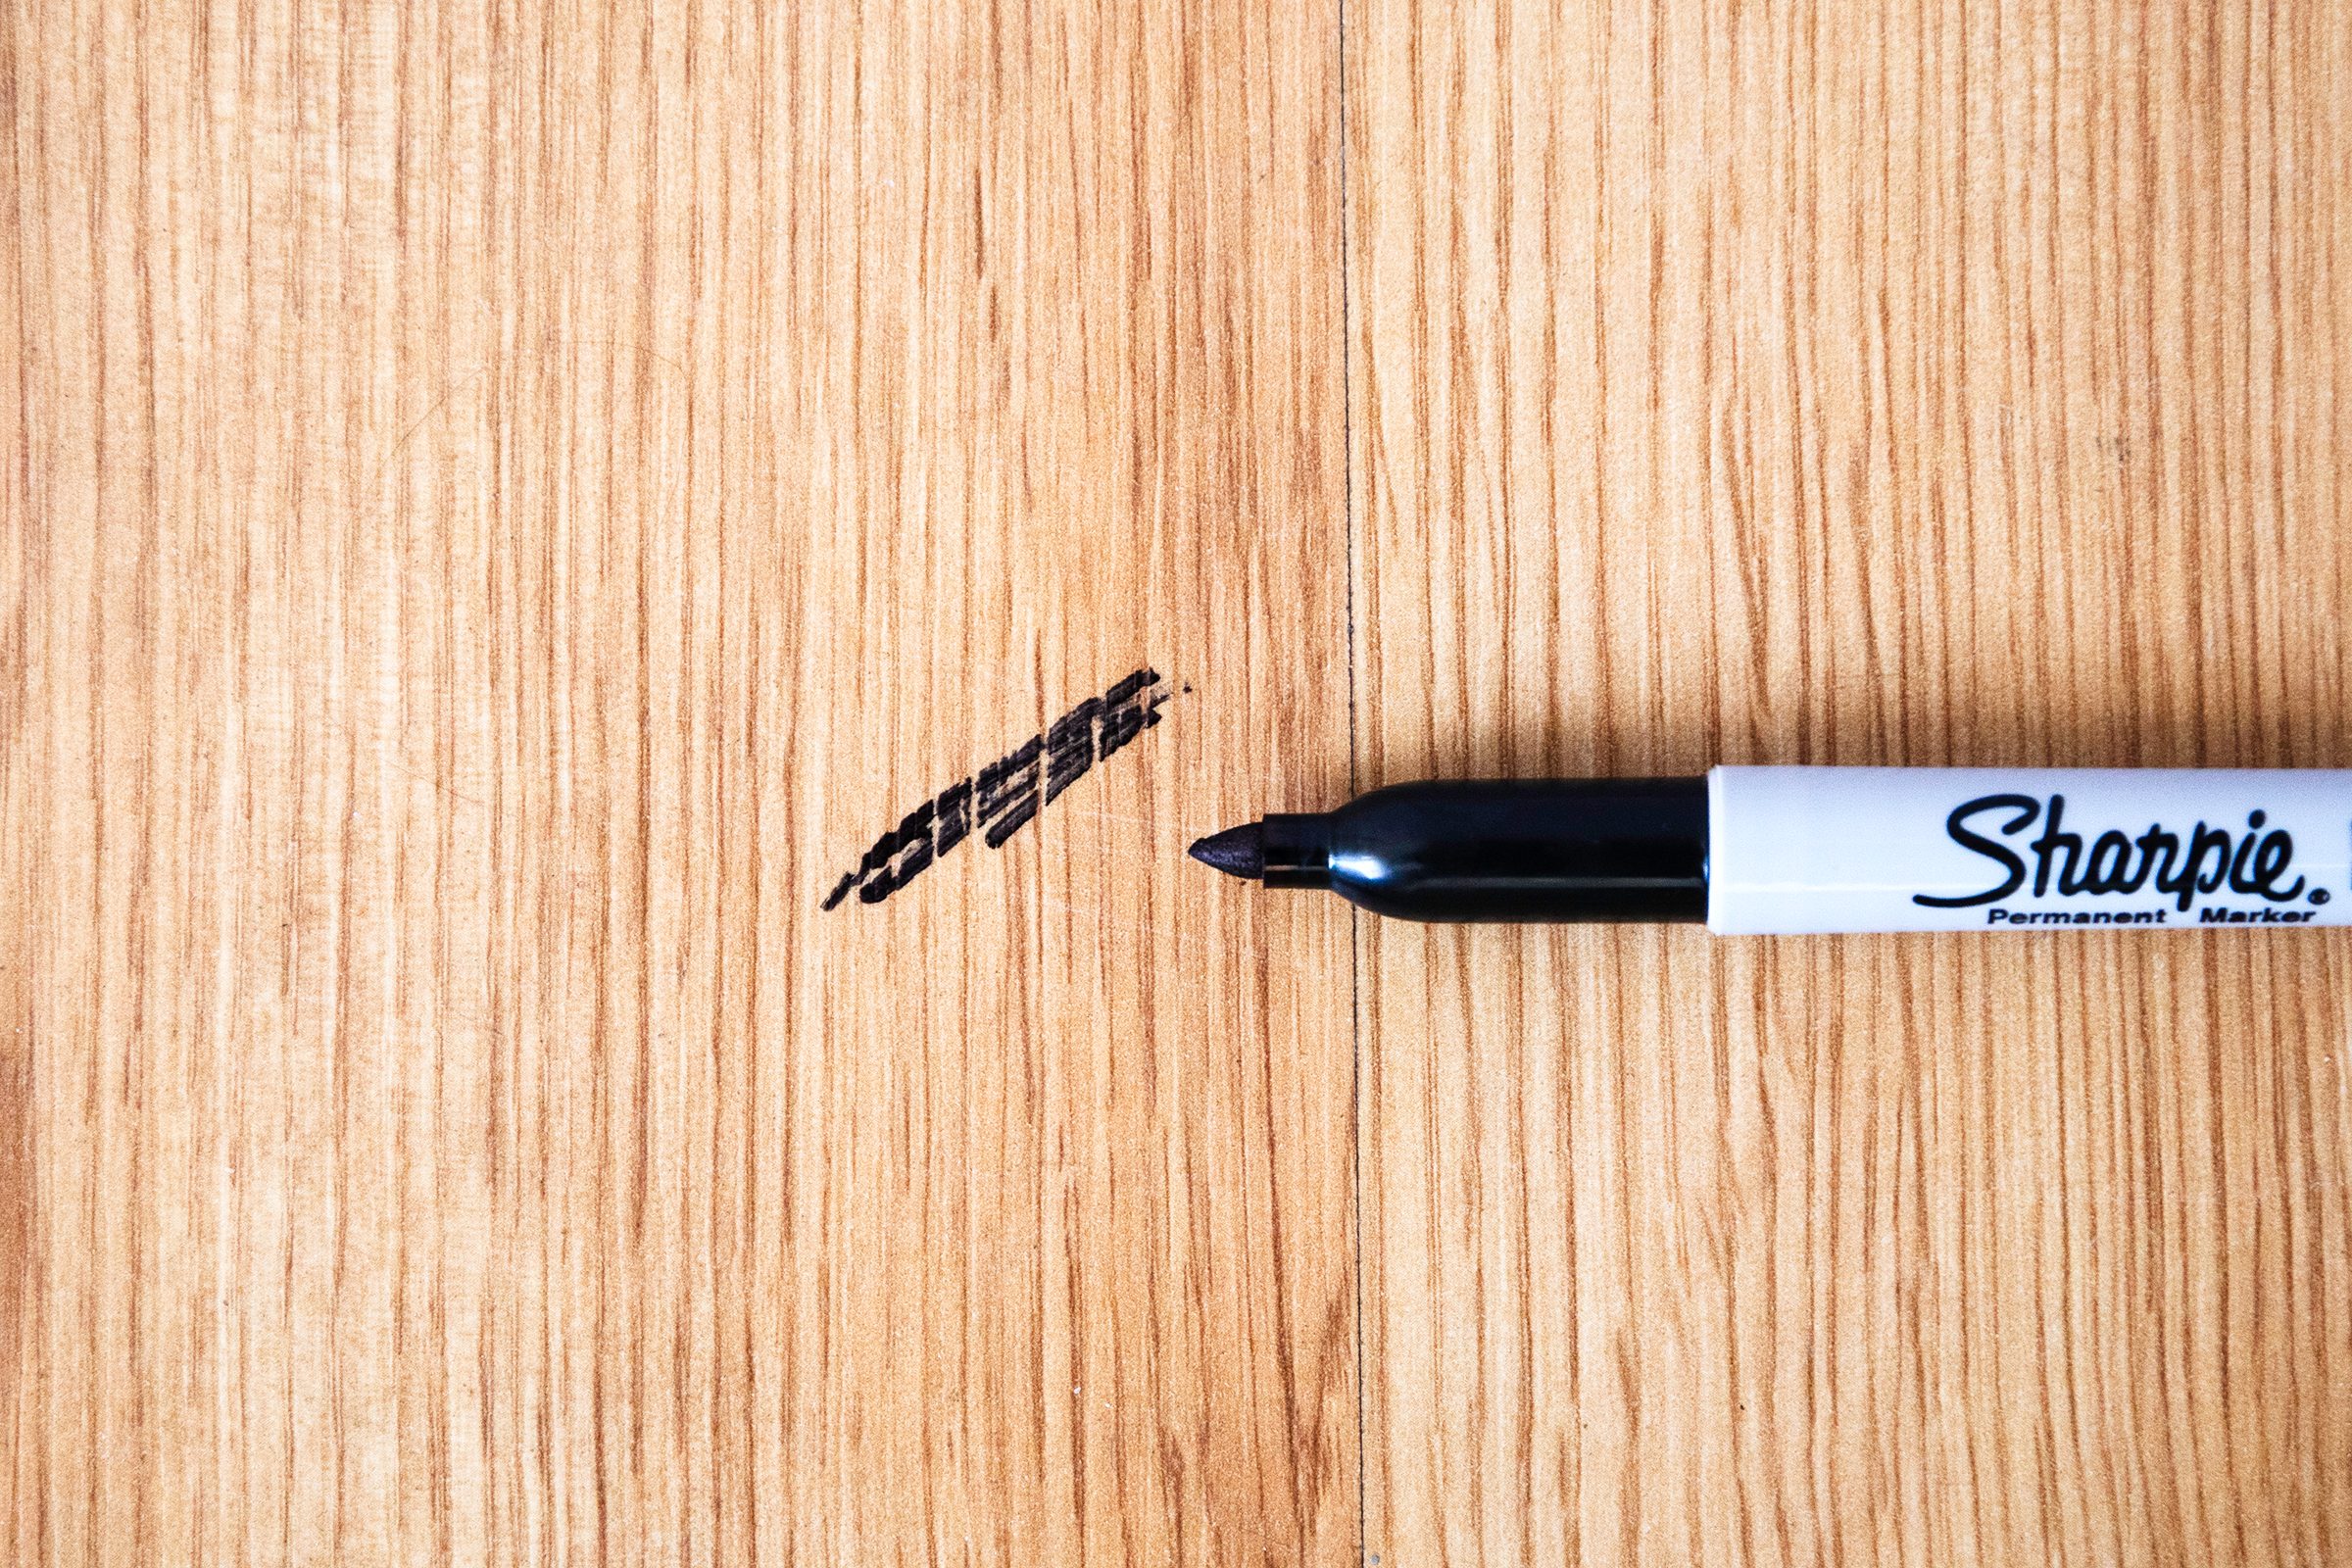 How To Remove Permanent Marker from Surfaces - Clever Ways